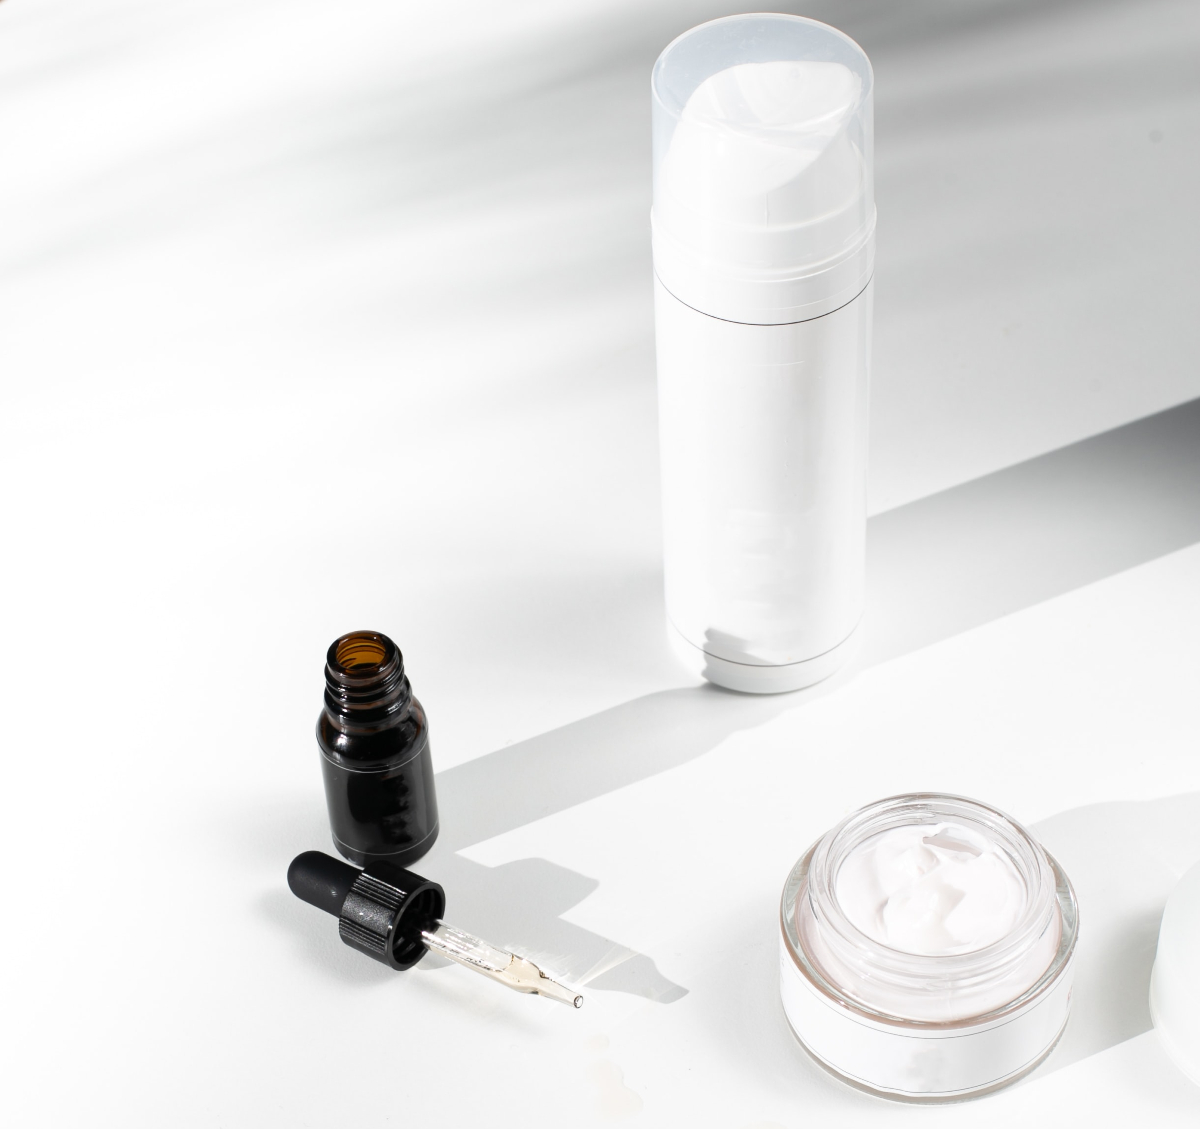 a dropper, serum package and cream or moisturizer sit on a white table